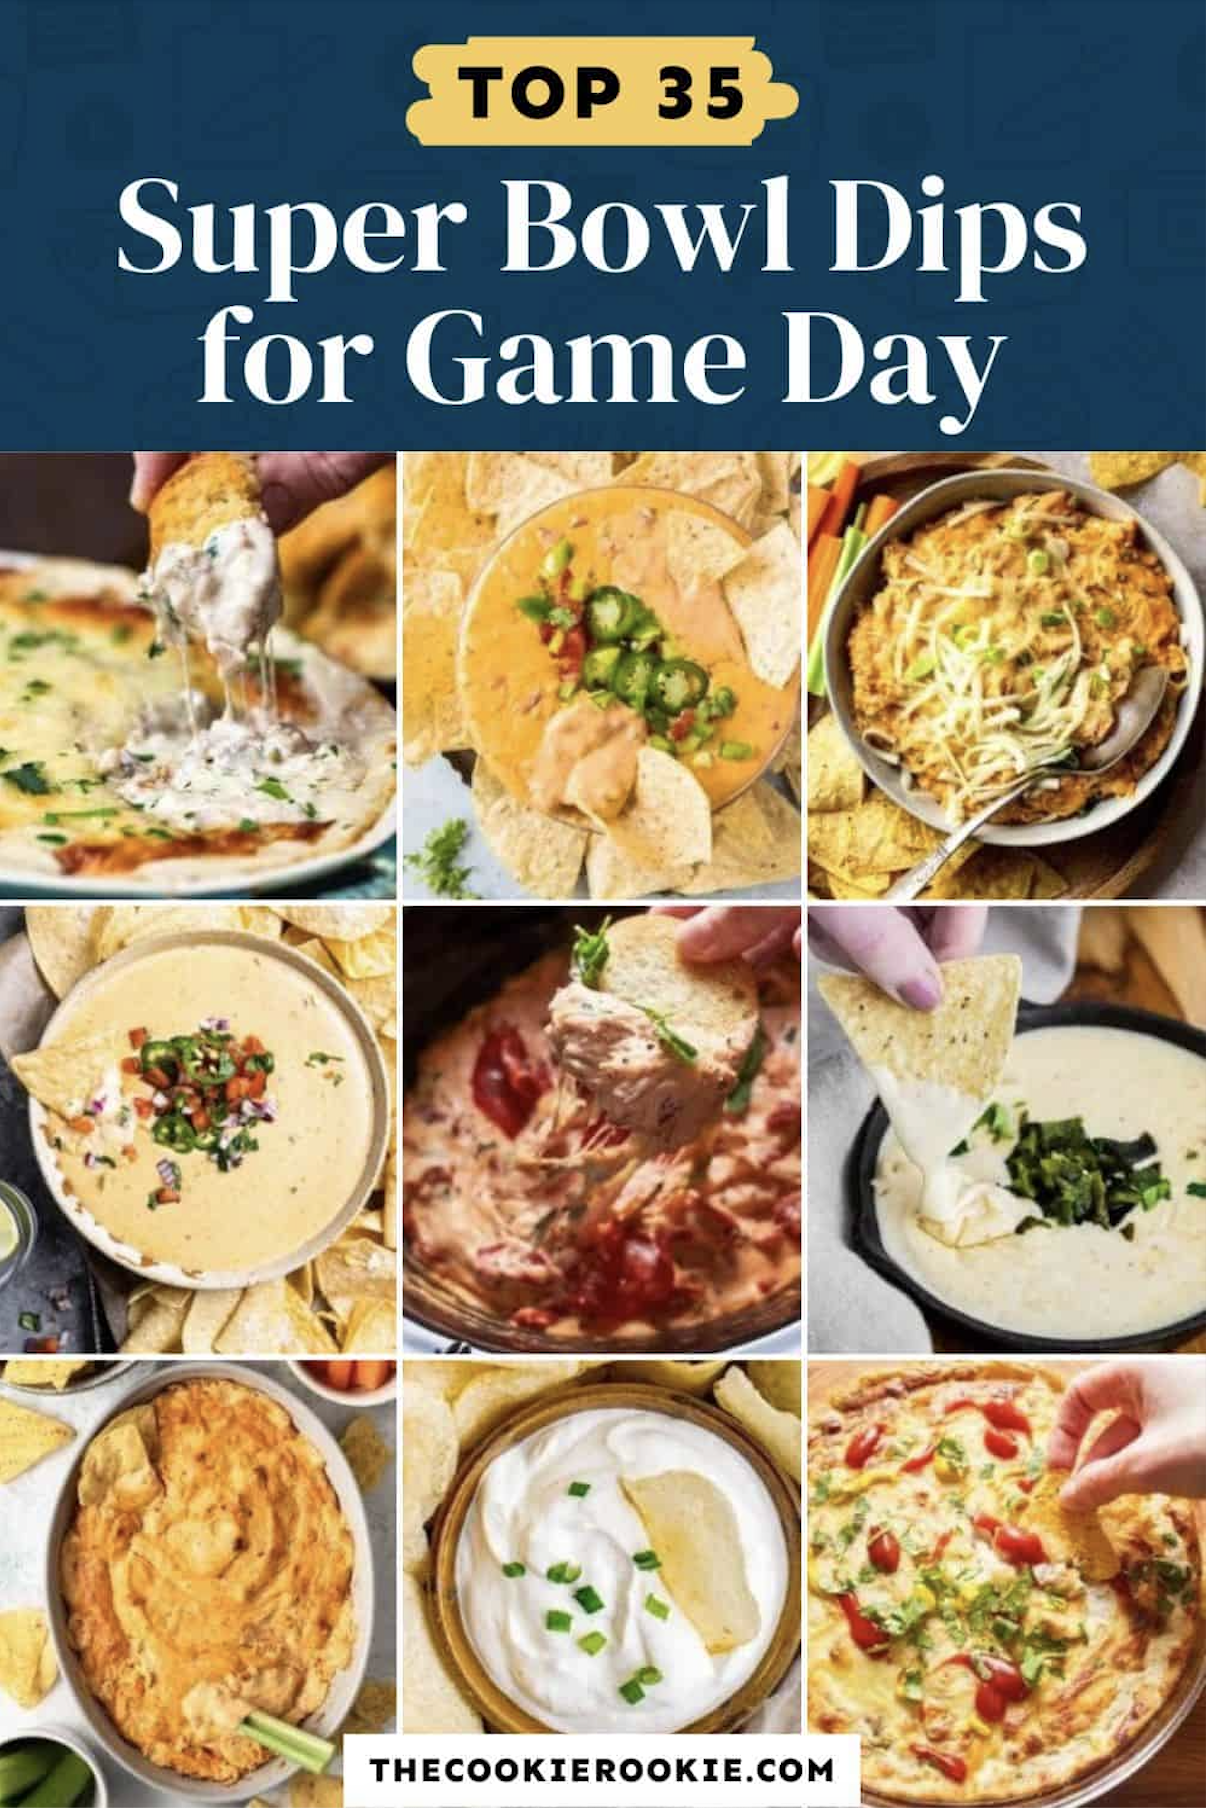 Explore the ultimate collection of Super Bowl dips, featuring the top 35 recipes for an unforgettable game day experience.